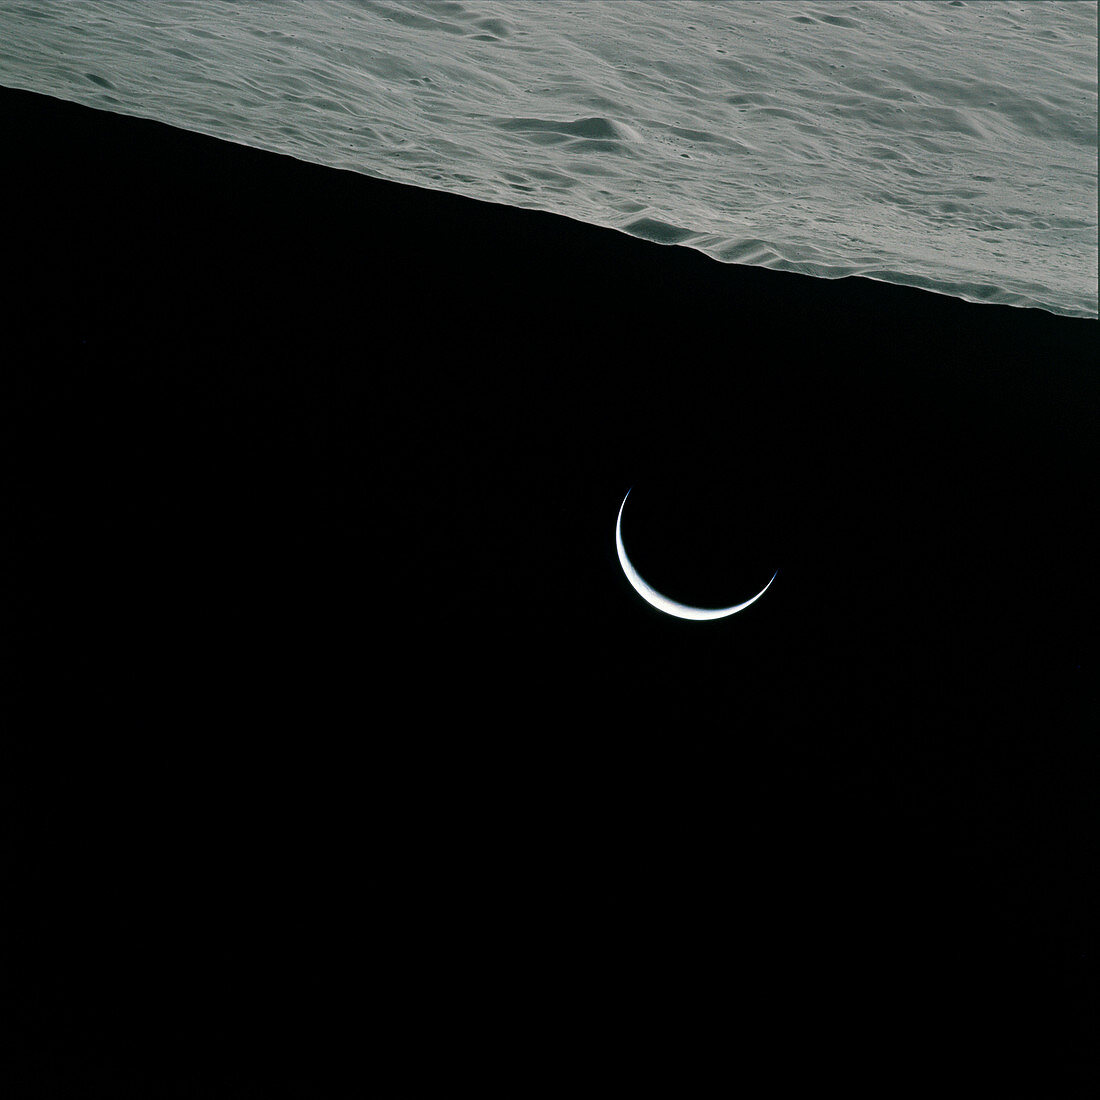 Earthrise from lunar orbit during Apollo 15,August 1971